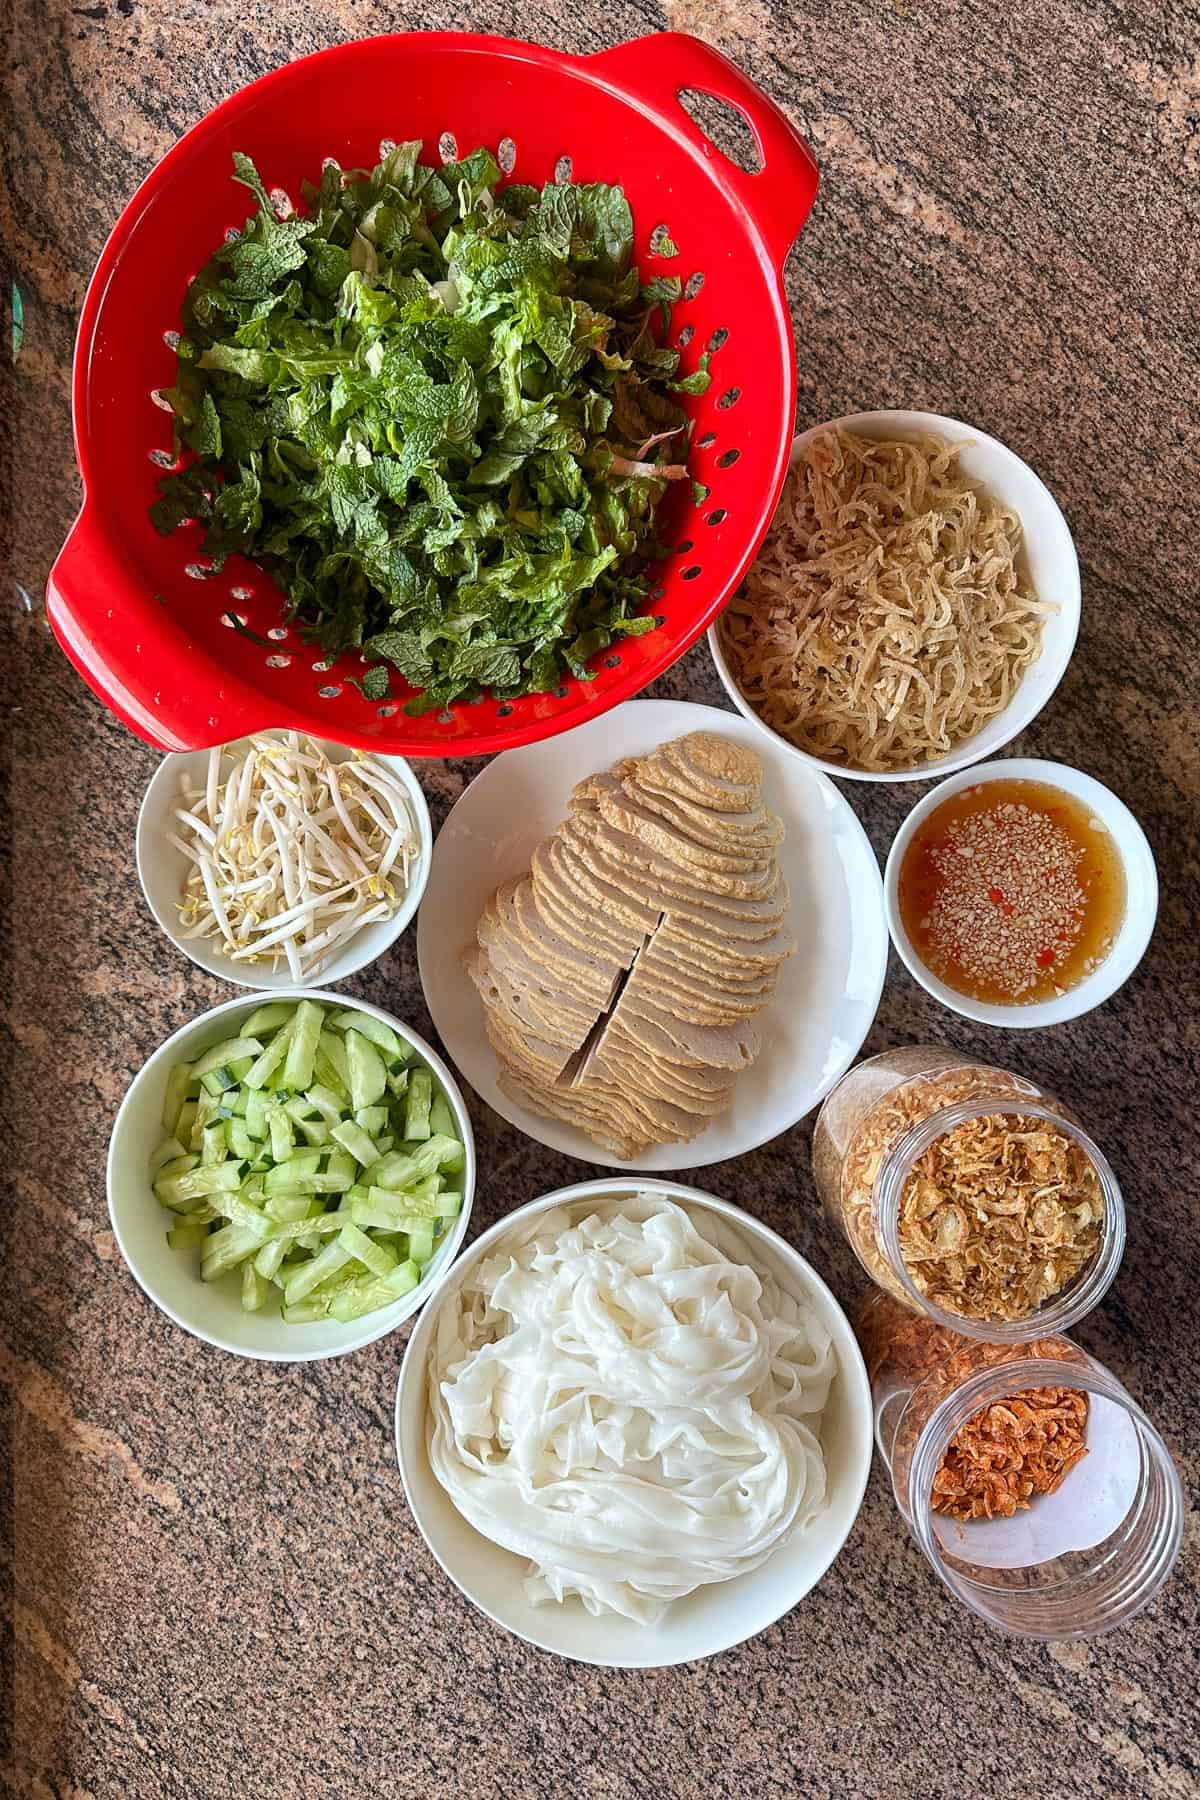 Ingredients for making Banh Cuon / Banh Uot.